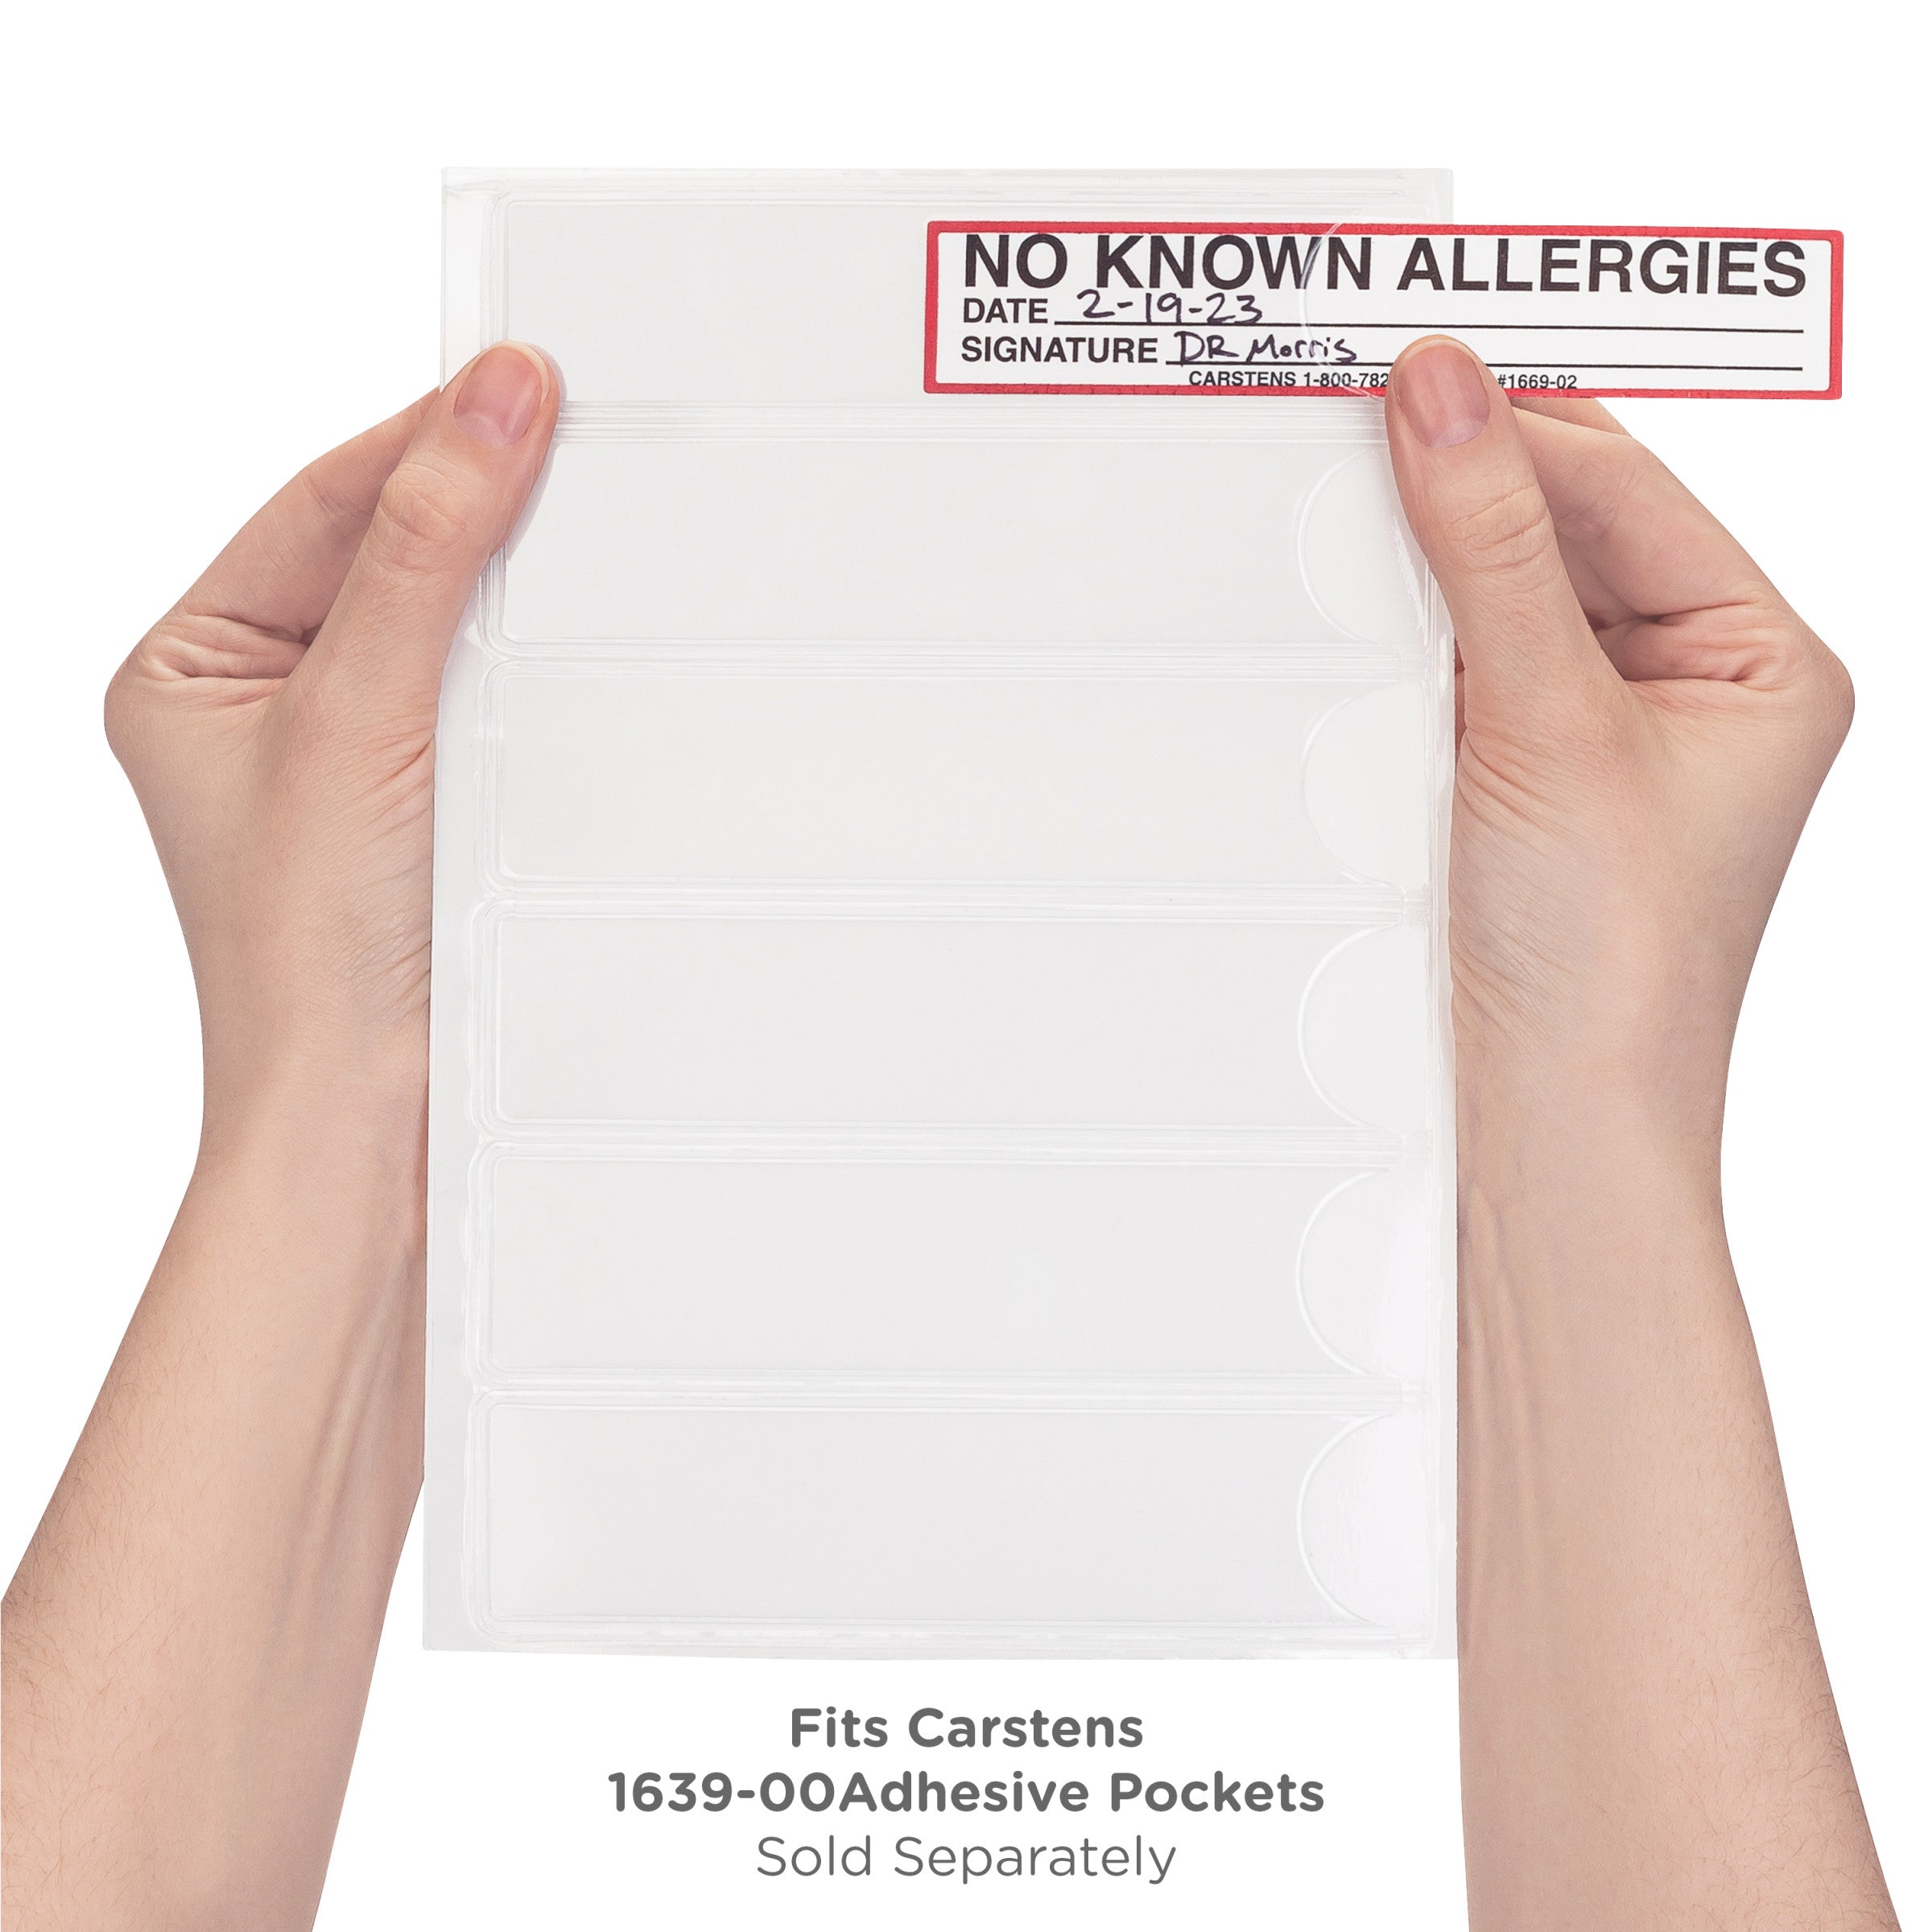 No Known Allergies Alert/Instruction Card, White, W5.25" x H1" (100 pack)